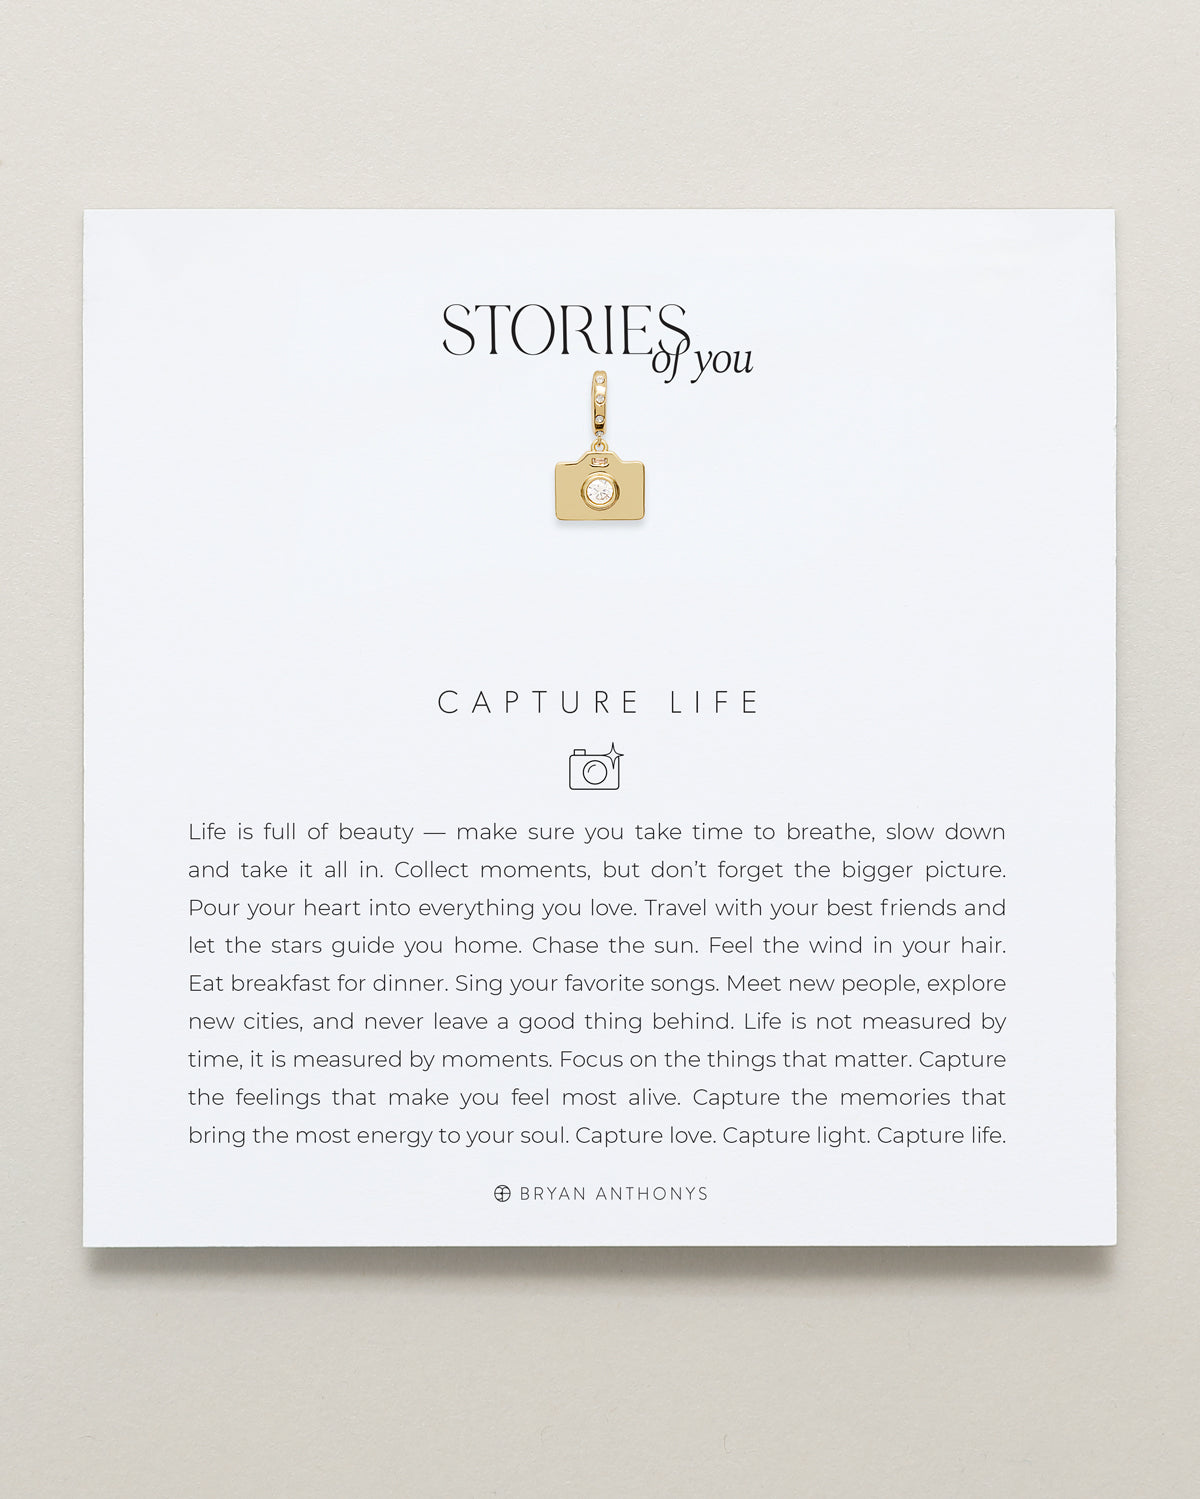 Bryan Anthonys Stories of You Gold Capture Life Charm On Card